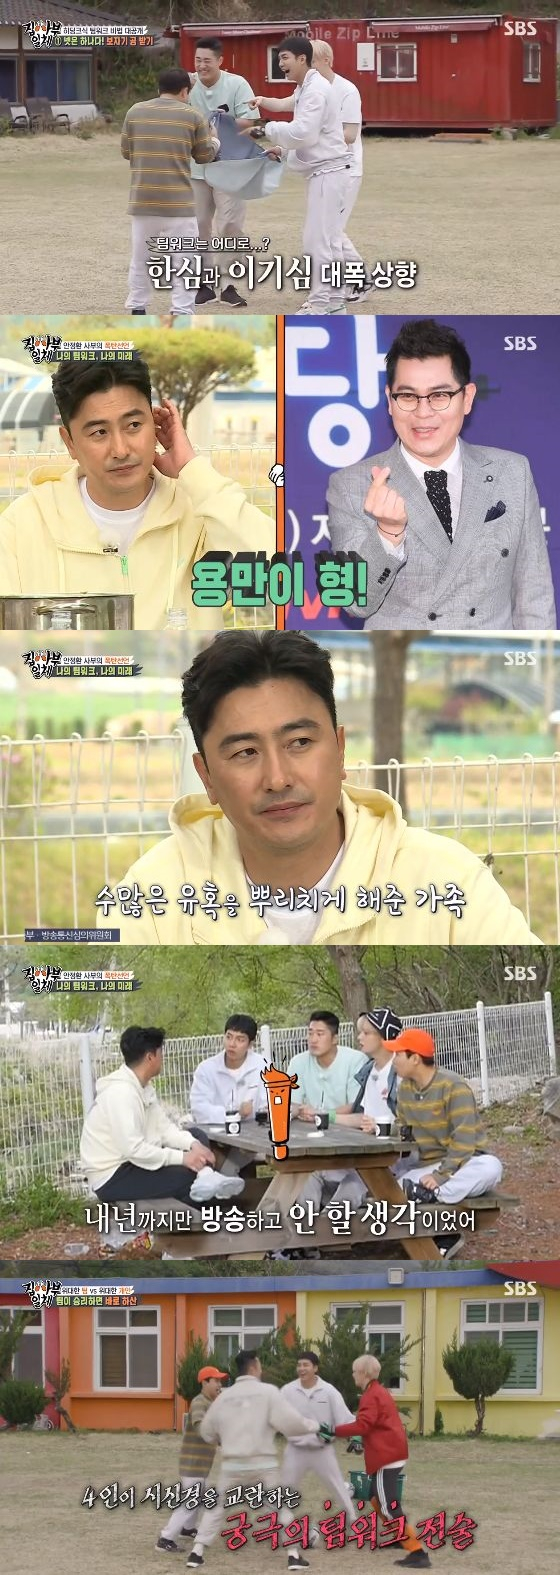 In the SBS entertainment program All The Butlers broadcasted on the afternoon of the 16th, Ahn Jung-hwans national teamwork training was drawn.On this day, Ahn Jung-hwan said, Training to raise concentration and teamwork. He ordered to receive balls and running rounds.The four have to move like one body, if you do well, youll get a break, said Ahn Jung-hwan, who exploded members steamy reactions.However, it was saddened by the feast of Mother Blame.The national players would have been harder than this, Yang Se-hyeong said.I did not know, I was going to wash and then I buried my pants with secretions, admits Ahn Jung-hwan. If it is too hard, I can not hear anything on the playground.At first, I hate the director, but later I will get it. The members tied each others hands together during the break and acted as a group.In a situation where he could not unravel his hands, Lee Seung-gi found the importance of the members who did not know that Se-hyung first learned his shoe size.Samgyetang, which came out for lunch, showed difficulty eating.During lunch, the split continued: Yang Se-hyeong suggested moving, saying, There is a cooking tool in the car to boil ramen.However, Kim Dong-Hyun did not happen, saying, If you move while eating, you will be full and you will not eat more.So the two-to-two conflict situation continued, and Yang Se-hyeong presented the nickname Kim Tudul saying, Donghyun grumbles to be his brother.After the meal, Ahn Jung-hwan explained about family teamwork: Home life is also a teamwork, Mrs. Lee (Mrs.) is the leader.If I did not marry, I would have lived a corrupt life. There was too much temptation in the growing environment. I was originally going to broadcast and rest until next year, said Ahn Jung-hwan, who surprised the performers as well as the staff at the scene.I dont know whether to go to football, study more, or add entertainment, but Im still planning, said Ahn Jung-hwan.The one-on-four penalty shoot-out match, which took place in the afternoon, was followed by members with their hands tied up and attacks and defenses.Ill kick my left foot (not my main foot), said Ahn Jung-hwan, who went to the match with a self-handicapped.Unlike the expectation that it would end with a one-sided victory by Ahn Jung-hwan, the game was played.The result was a 3-2 win for the All The Butlers team, and Ahn Jung-hwan praised All The Butlers team for their teamwork seems to be the best.